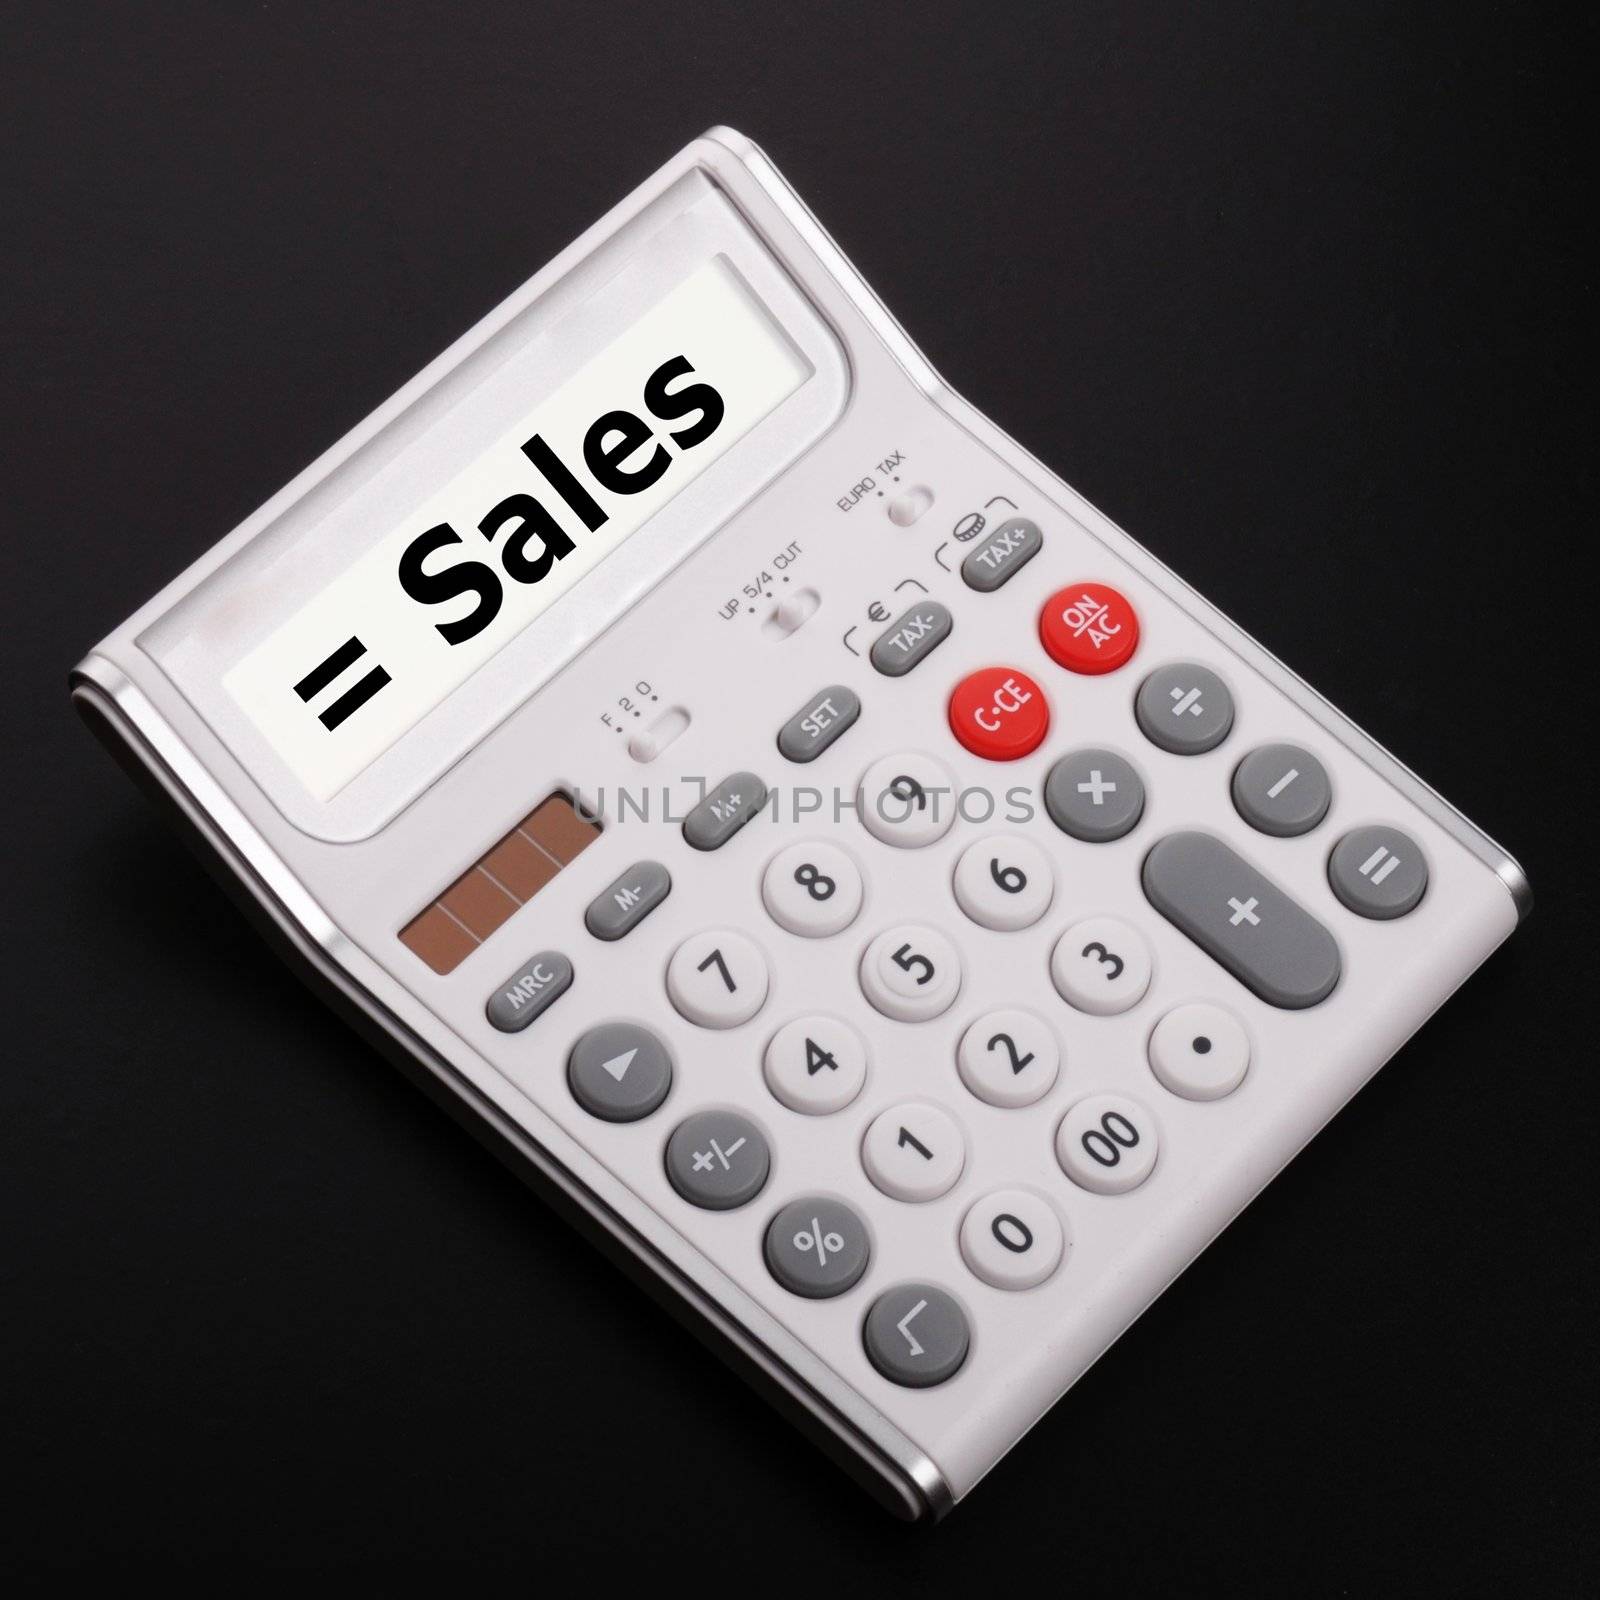 sales growht concept with business calculator on office